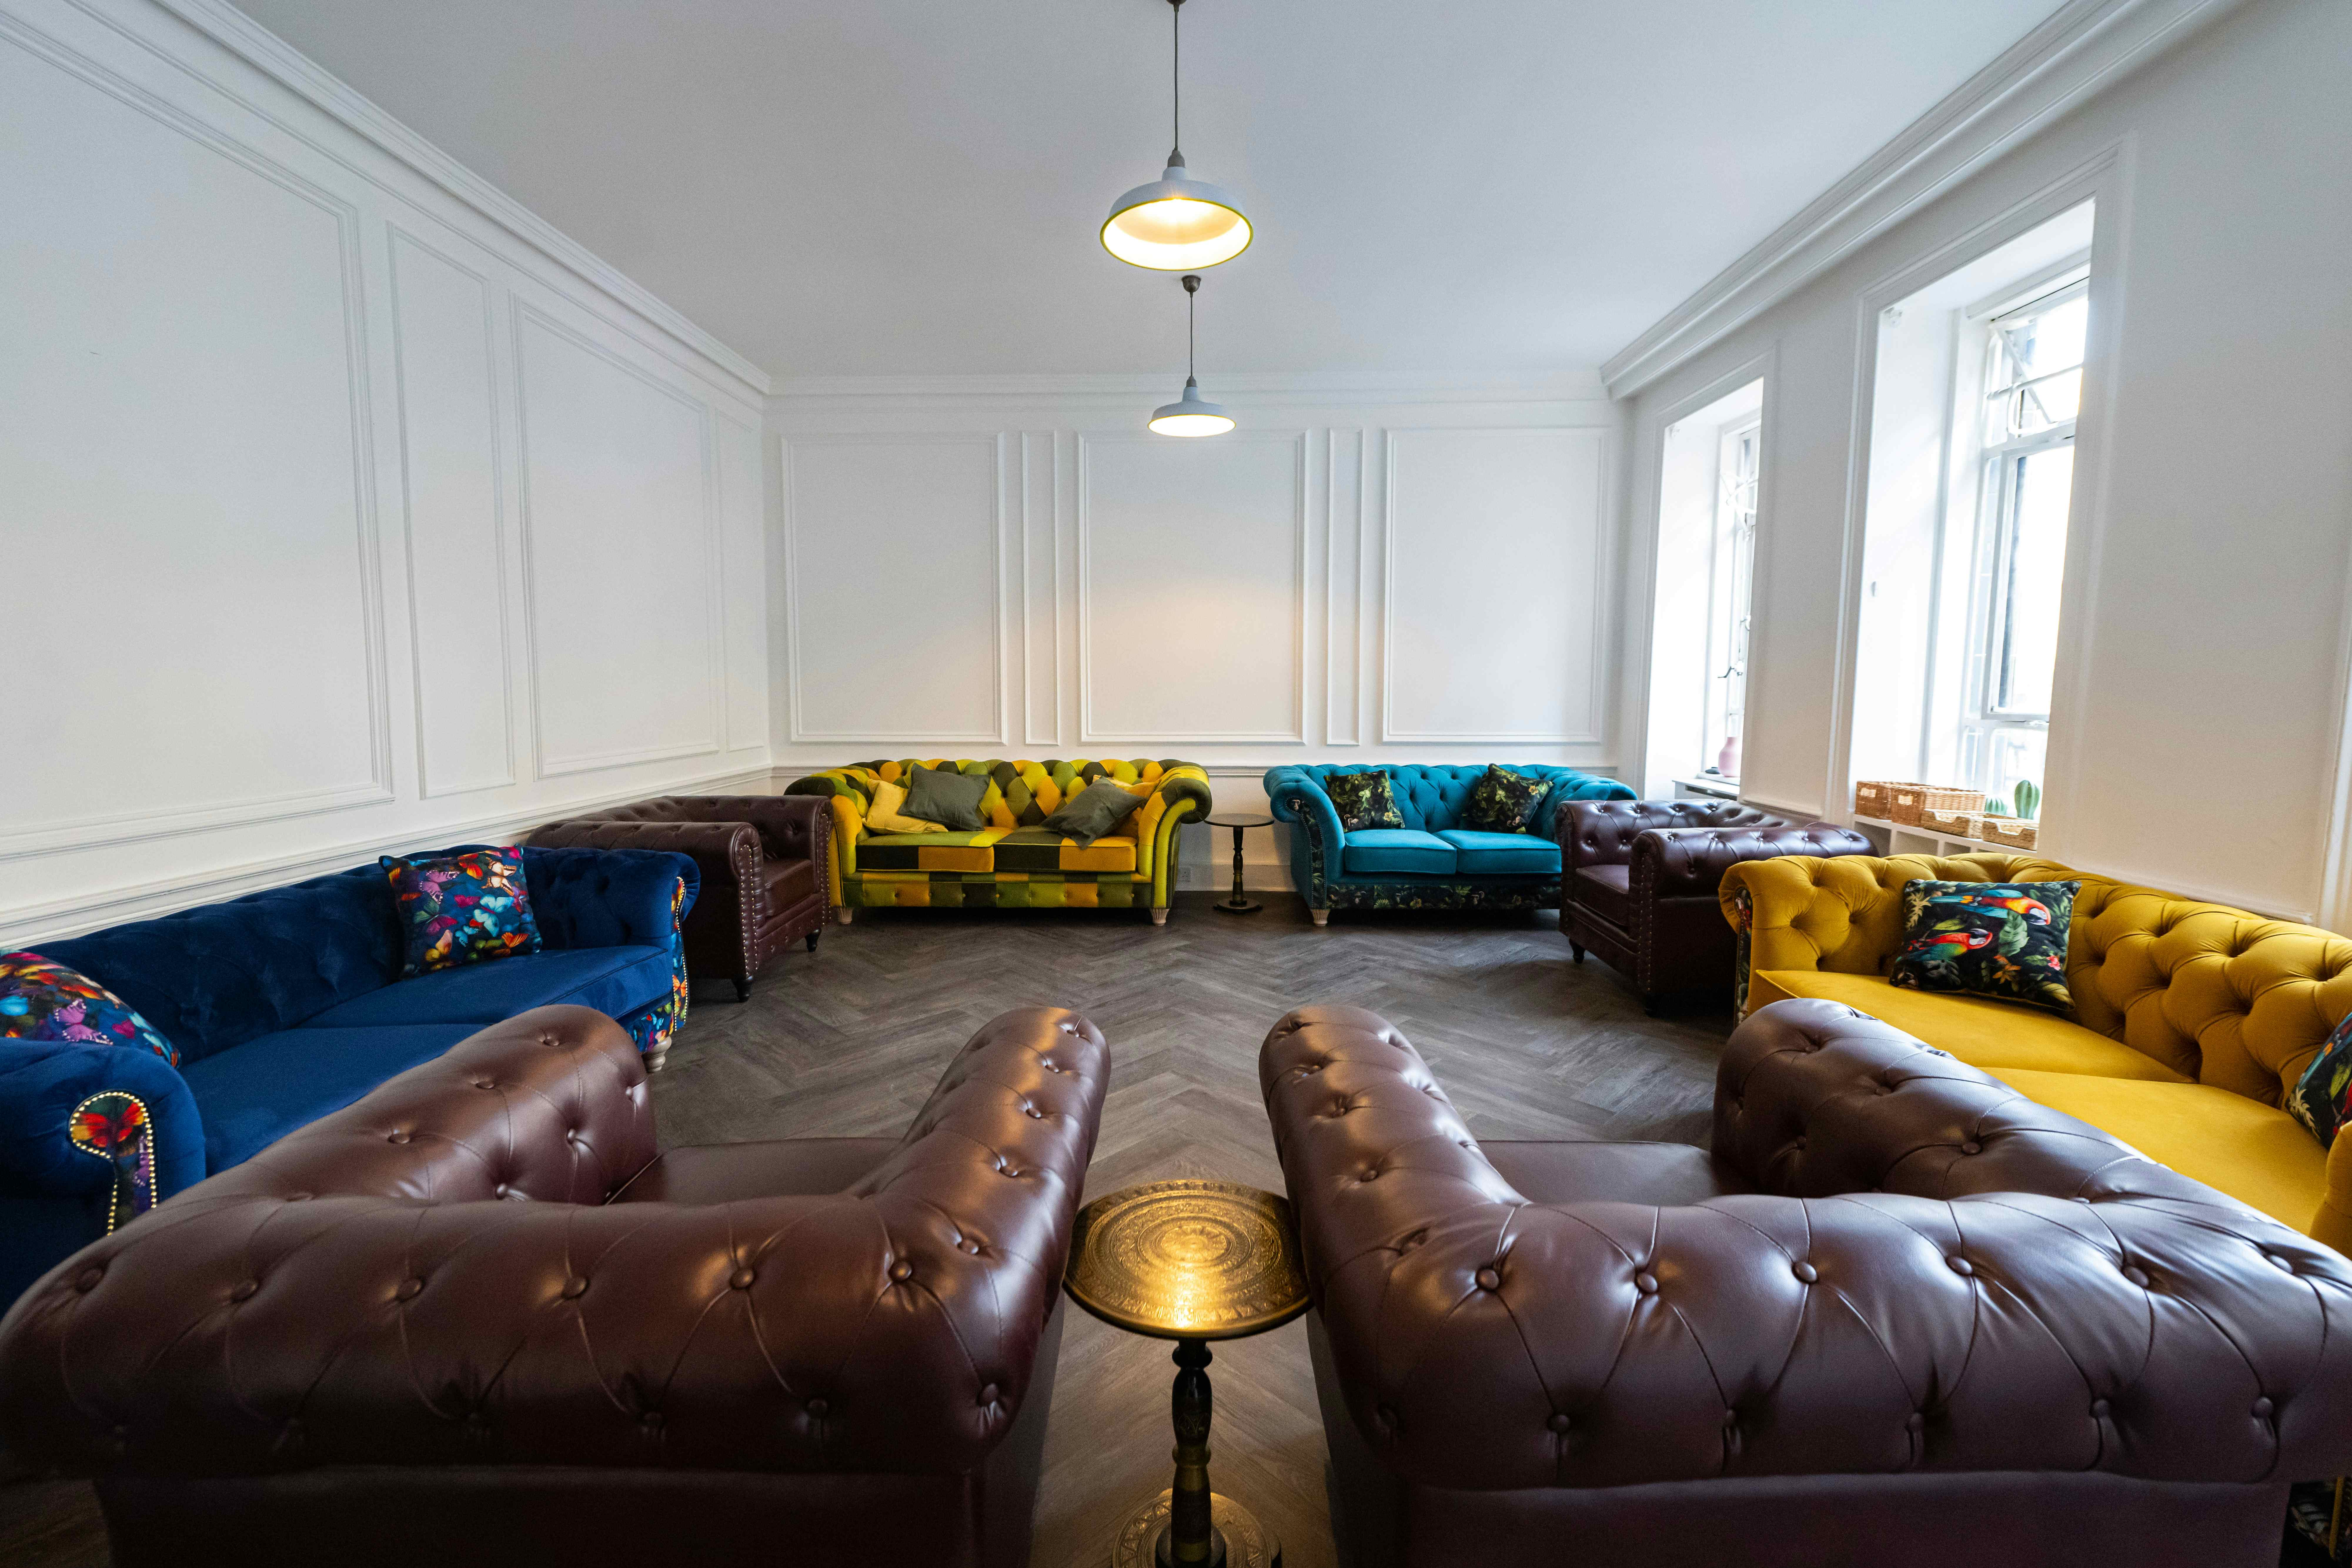 The Colourful Room, Enish Restaurant & Lounge Covent Garden